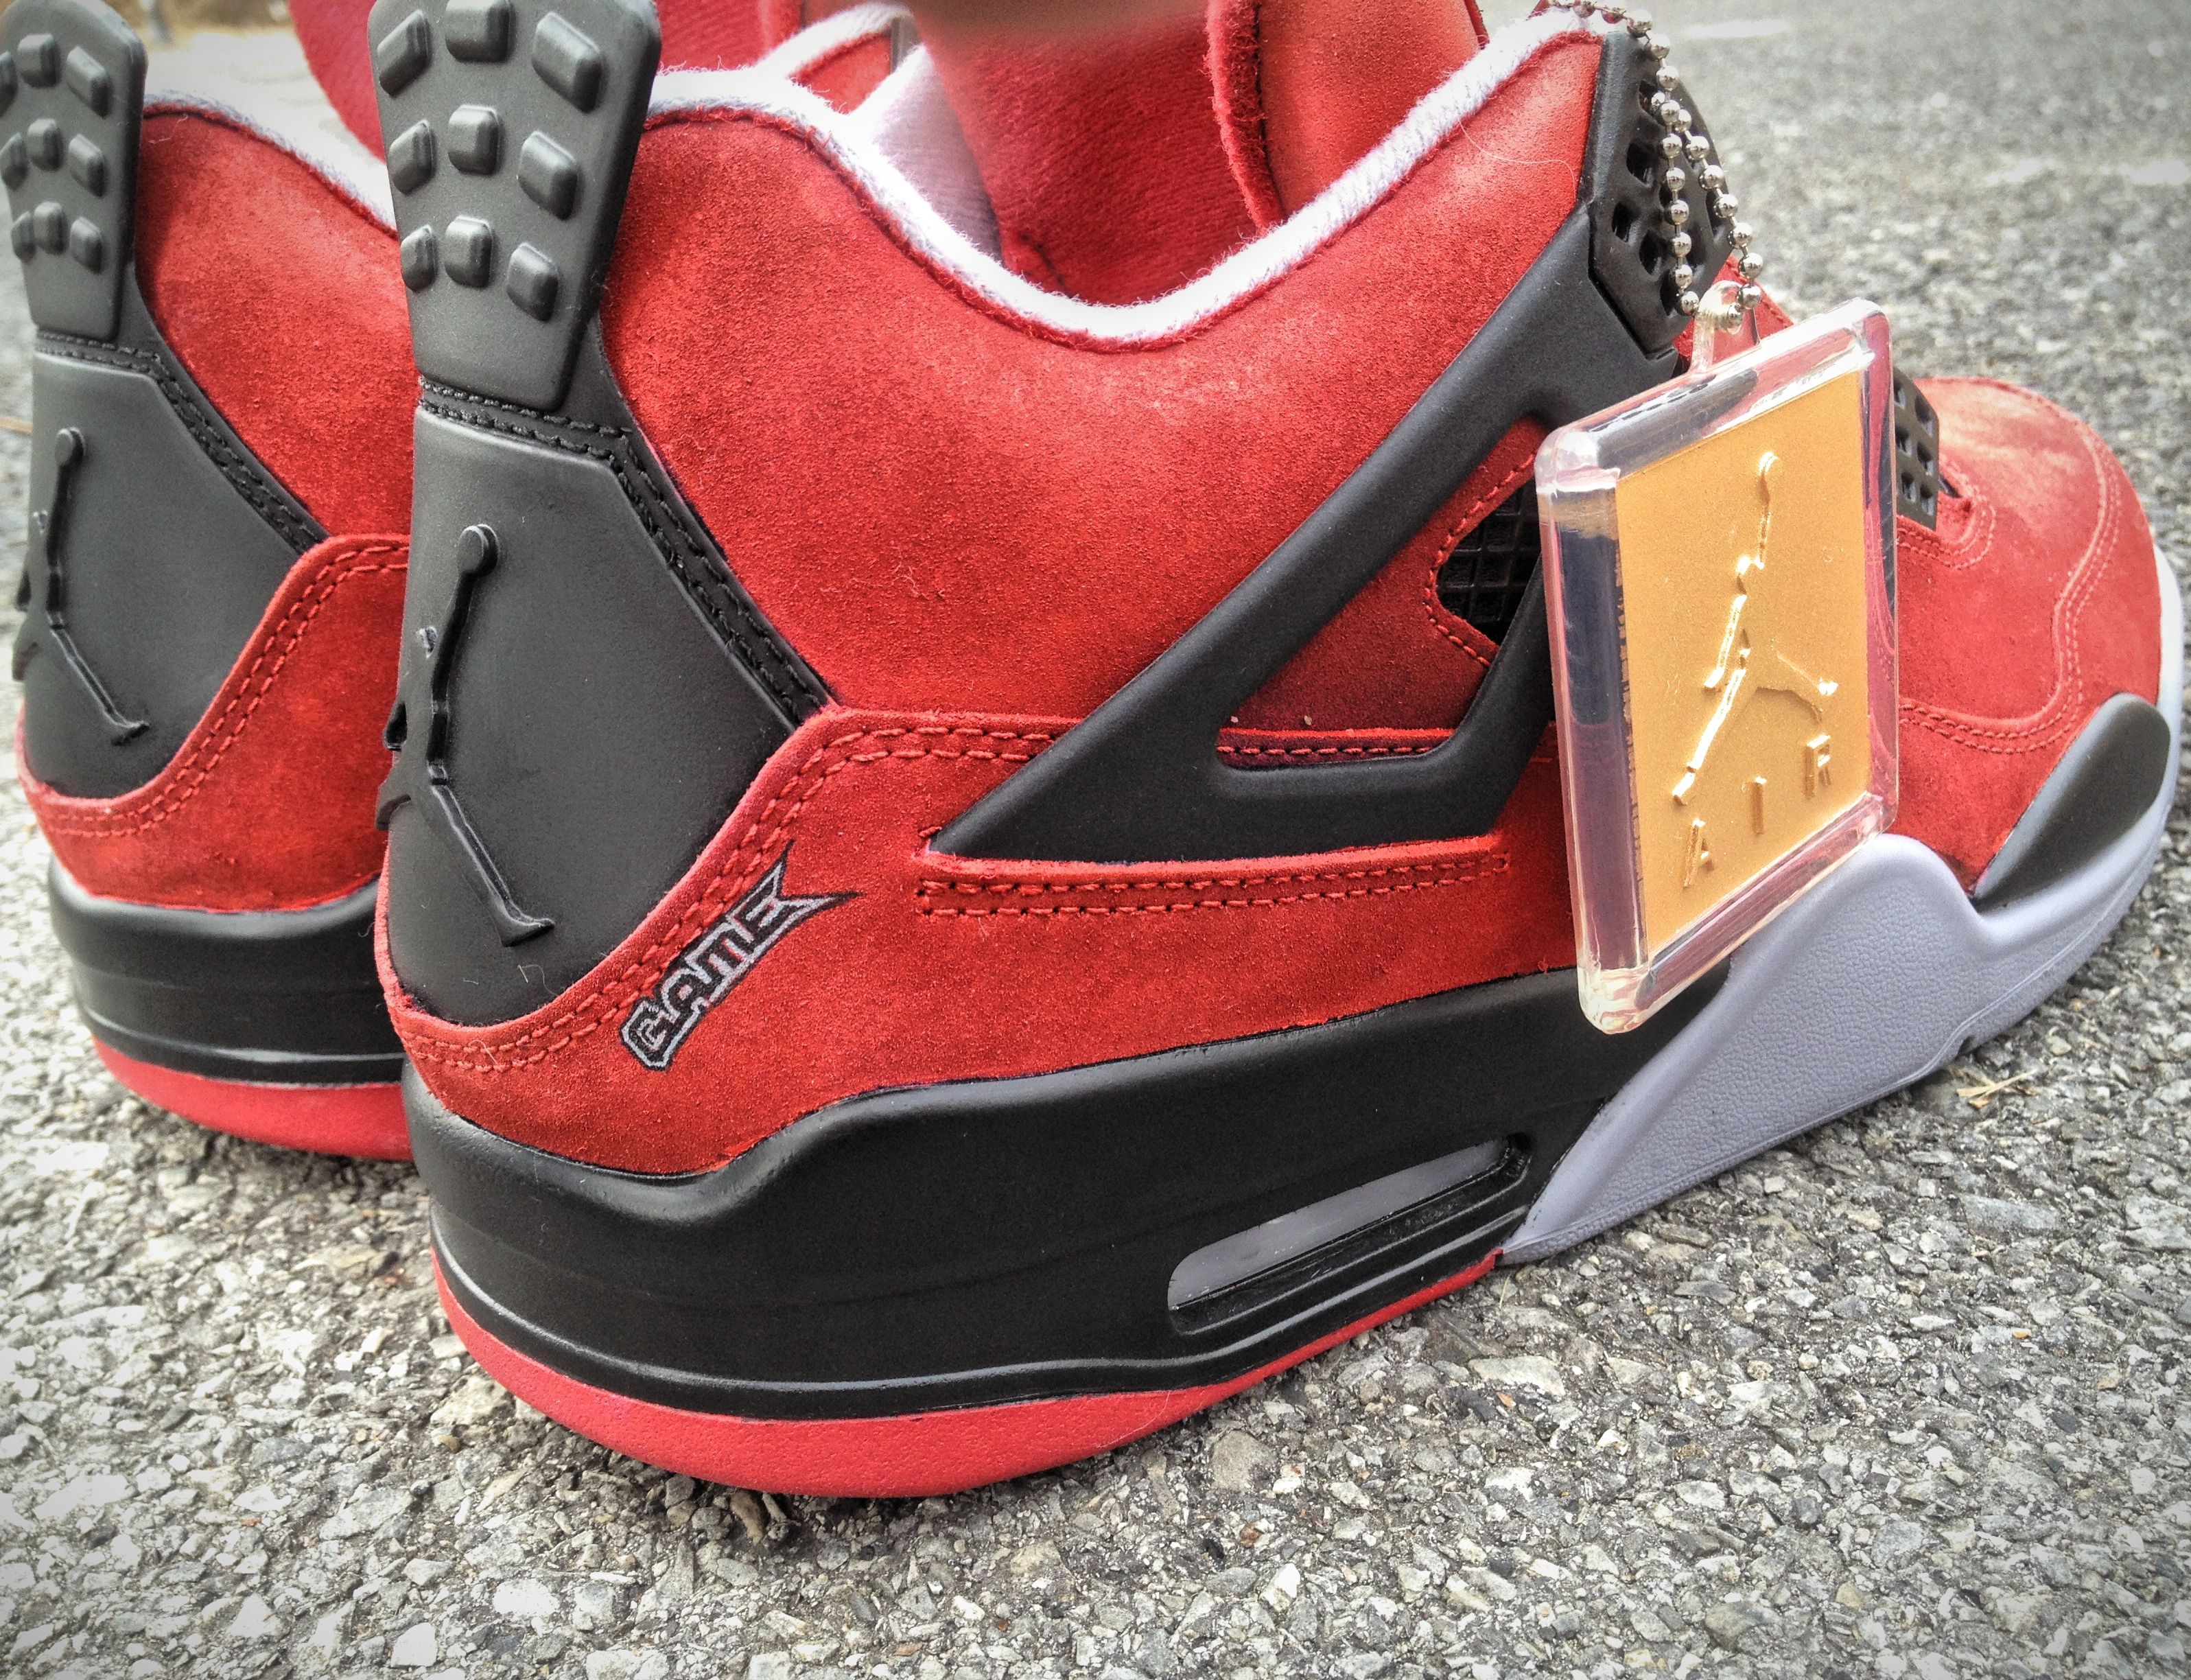 Check Out These Nike Air Jordan 4 Game Boy-Themed Customs